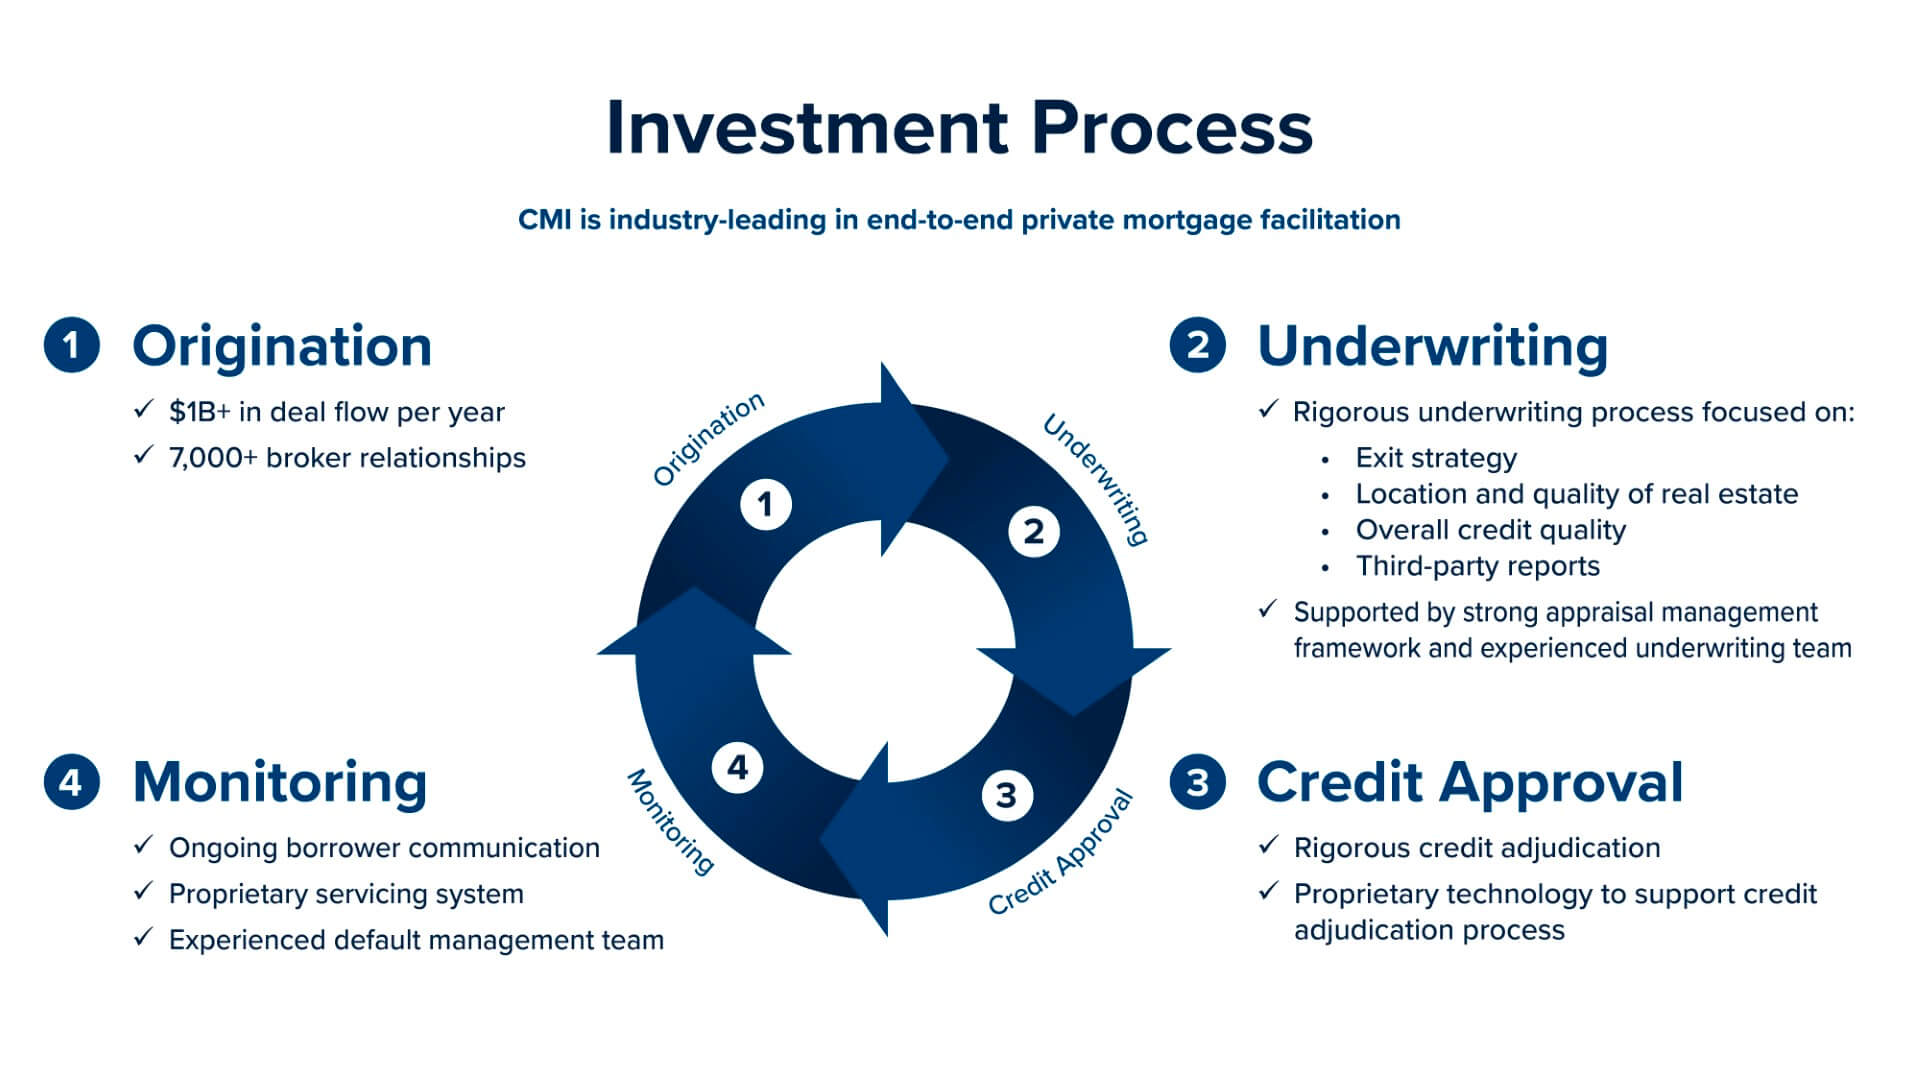 CMI Mortgage Investments - Investment Process